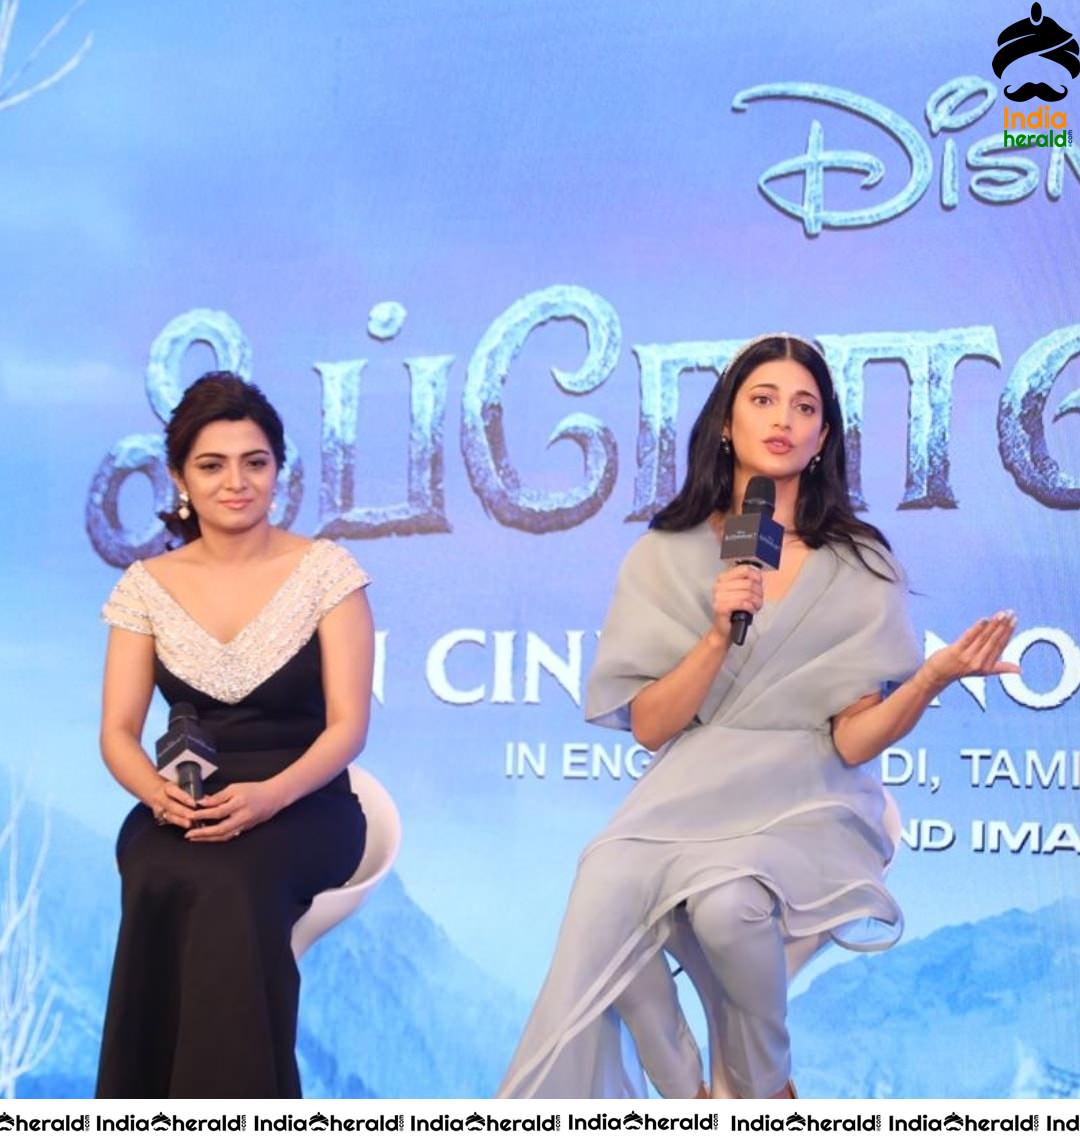 Shruti Haasan and DD from the Tamil Press Meet of Frozen 2